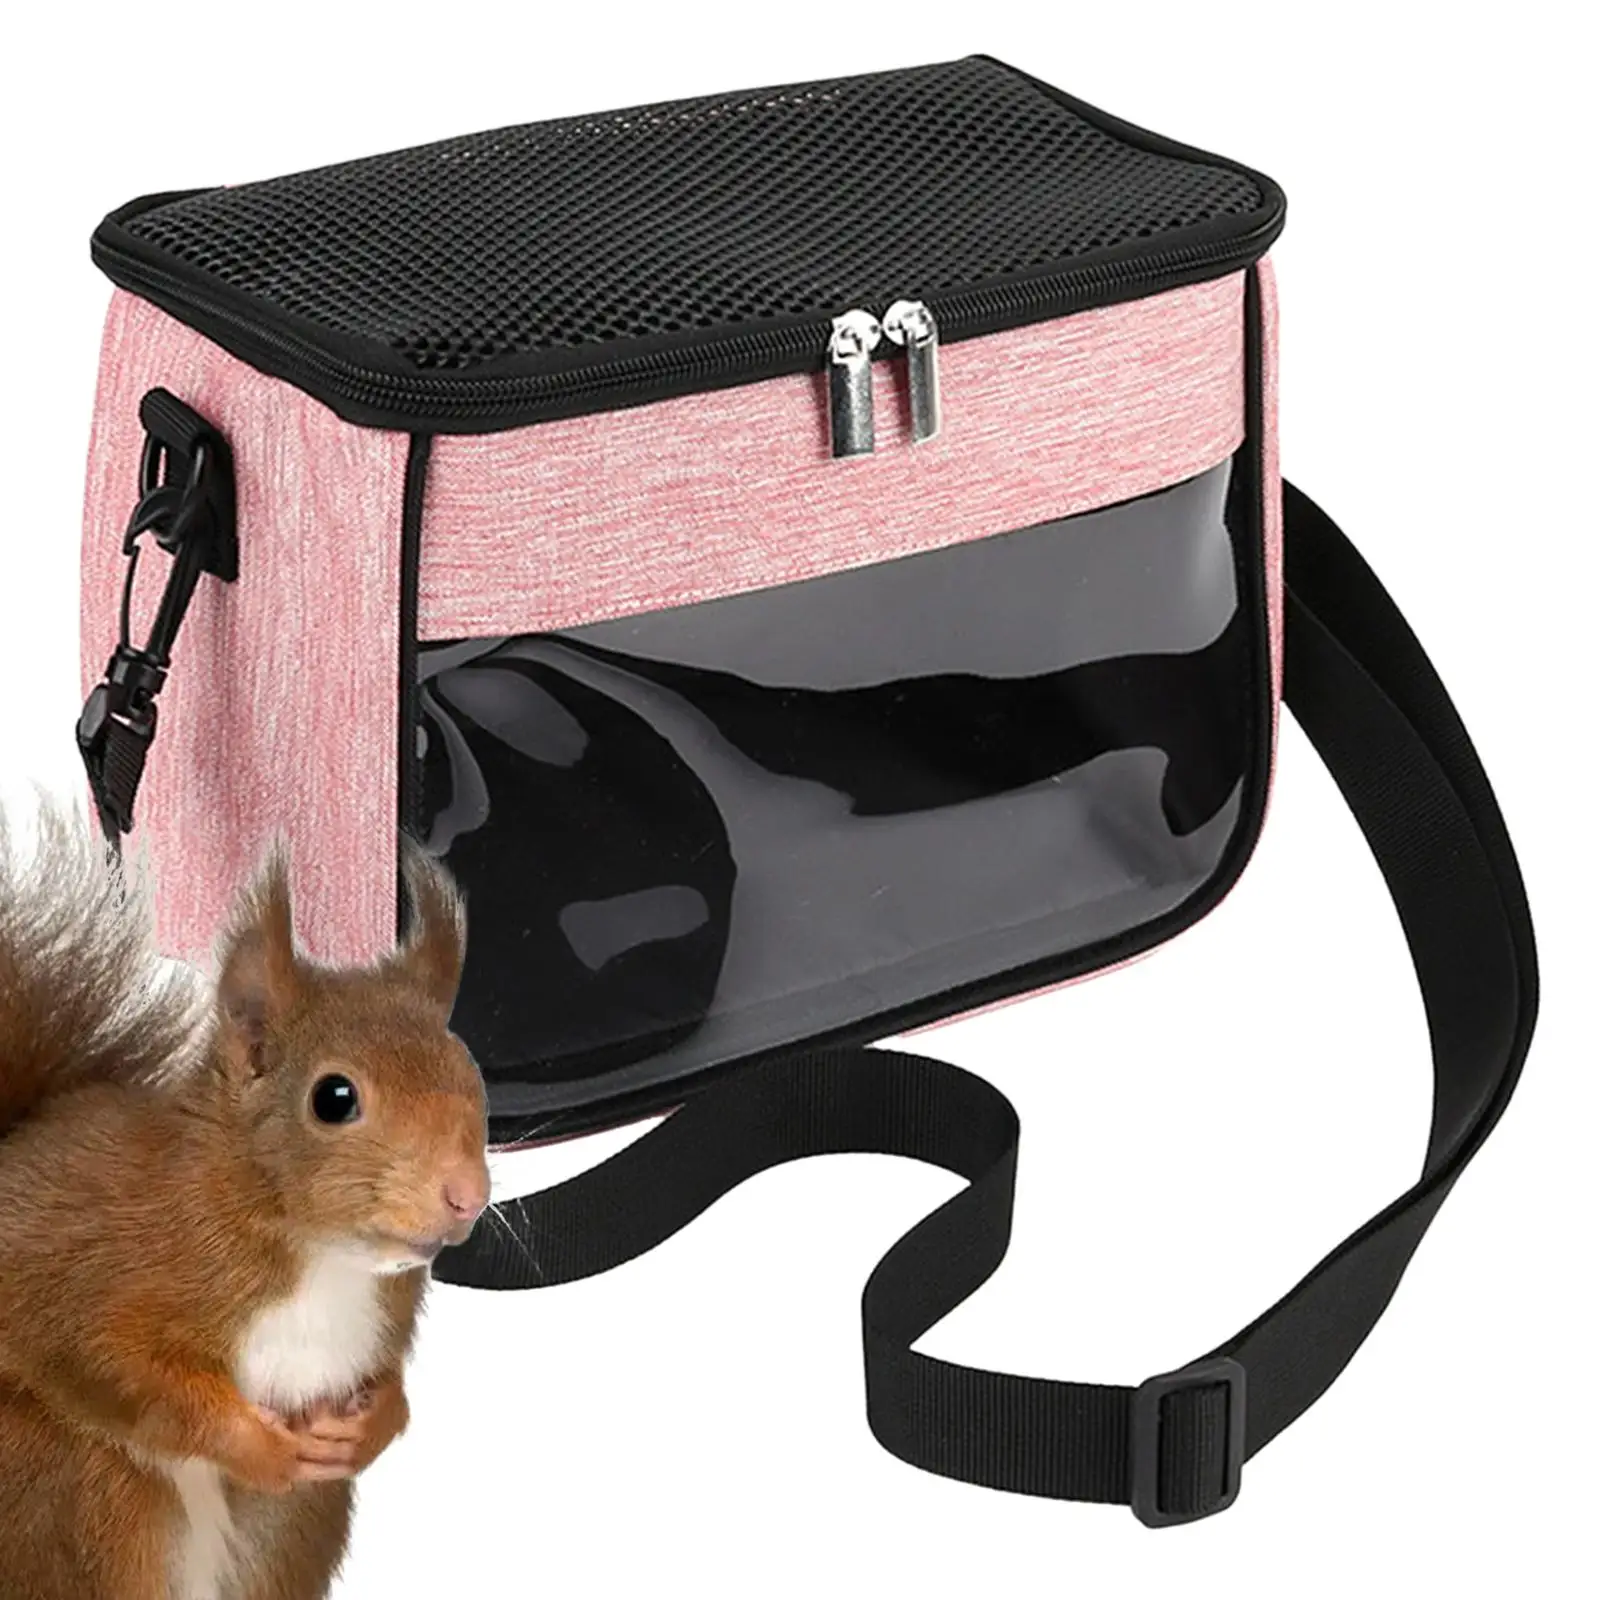 Hamster Carrier Bag Travel Carrier Outdoor Pouch for Hedgehog Small Animals